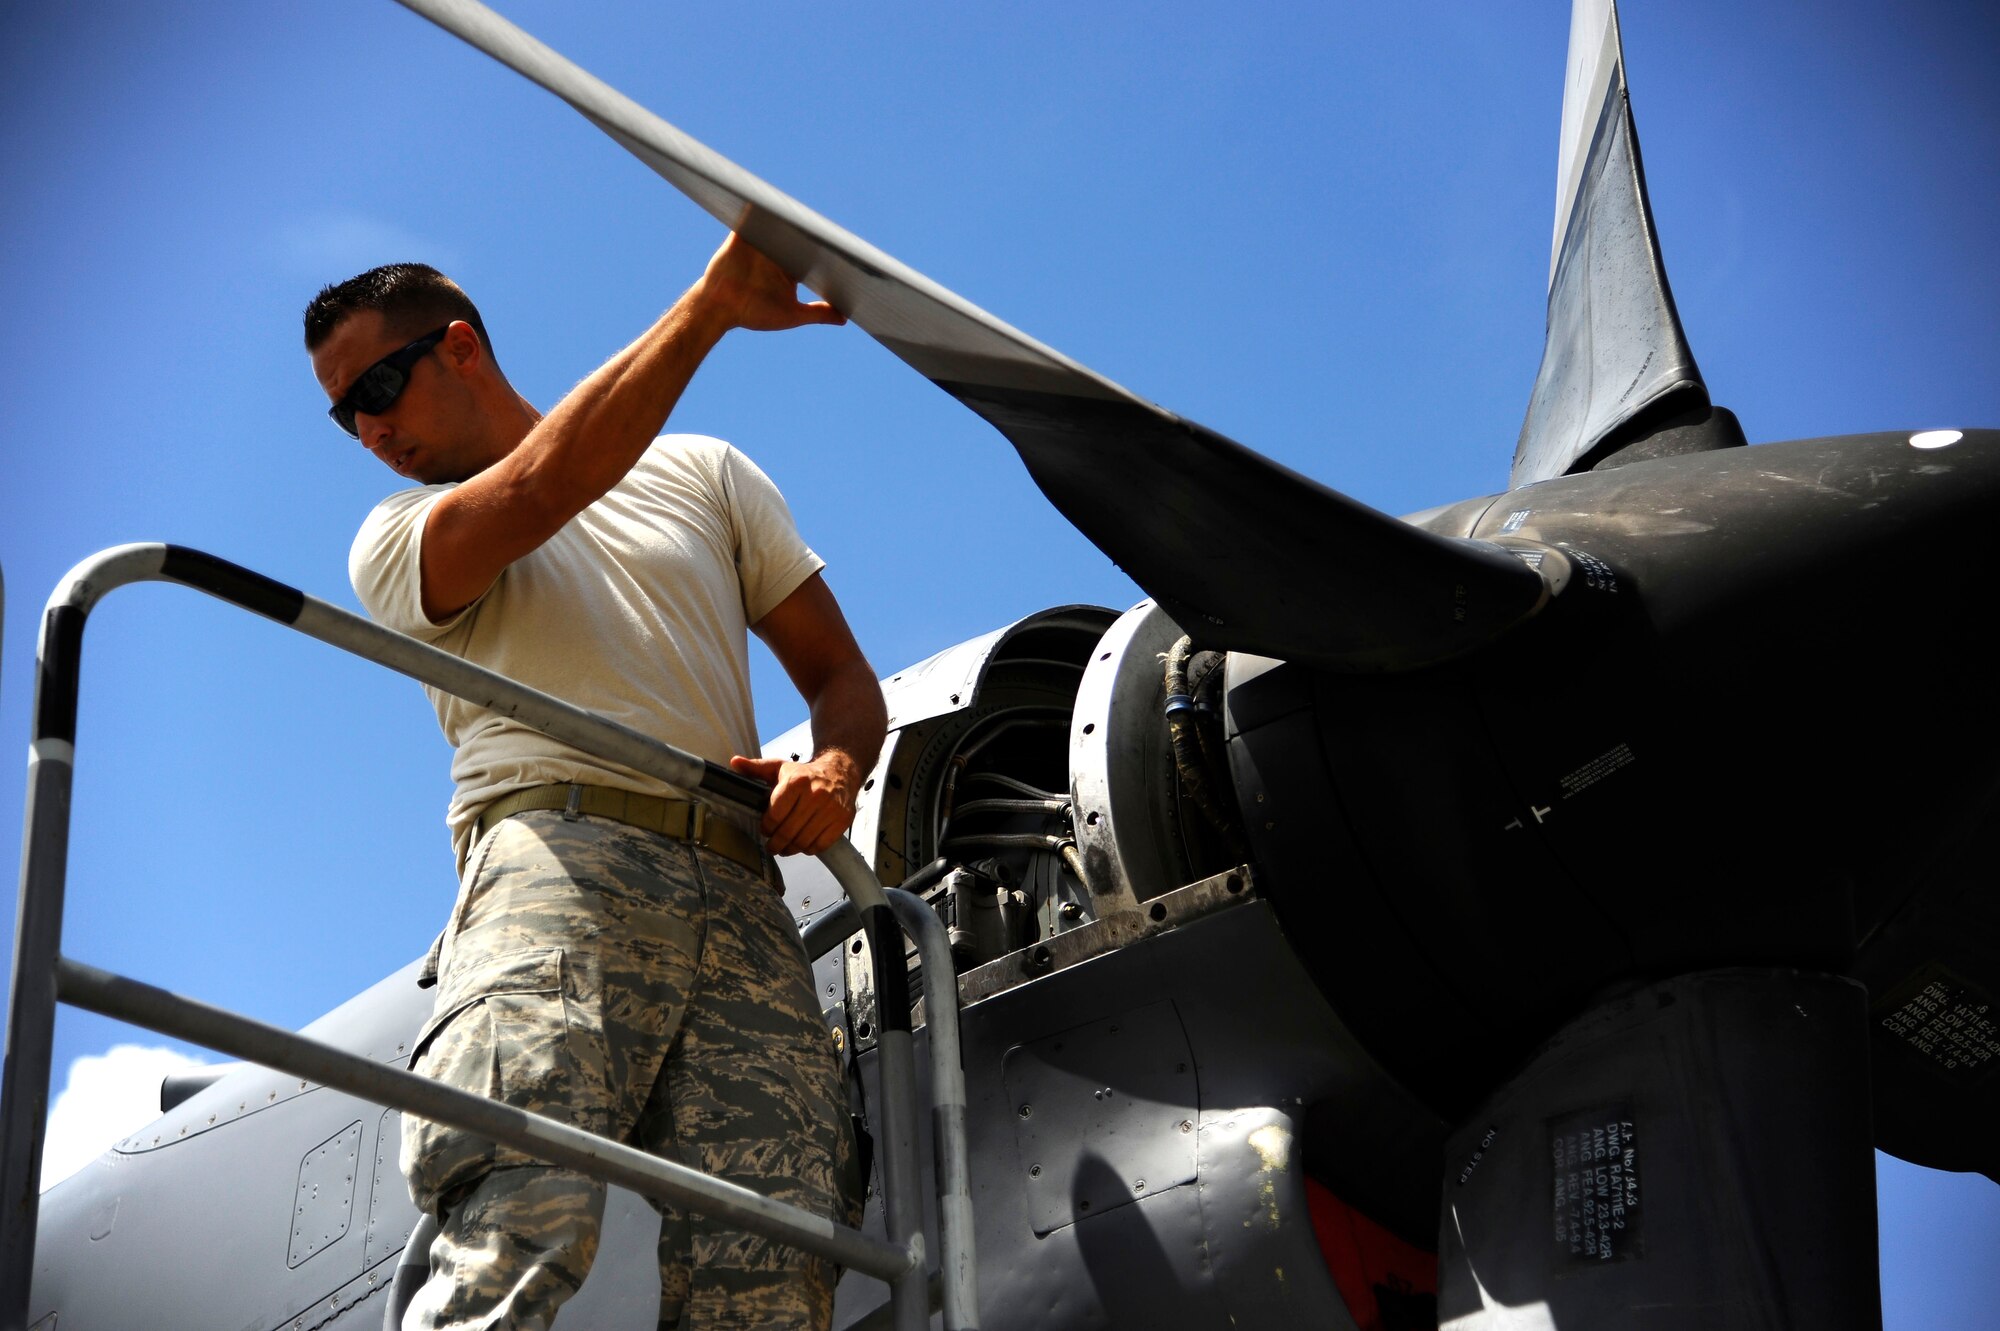 U.S. Air Force Staff Sgt. Todd Bishop, 1st Special Operations Maintenance Squadron aerospace propulsion journeyman, troubleshoots an MC-130H Combat Talon II engine on the flightline at Eglin Air Force Base, Fla., July 25, 2011.  The 1st SOMXS’s mission is to organize, train and equip Airmen to perform aircraft maintenance and back shop support for the MC-130P Combat Shadow flown by the 9th Special Operations Squadron as well as other special operation aircraft. (U.S. Air Force photo by Airman Gustavo Castillo)